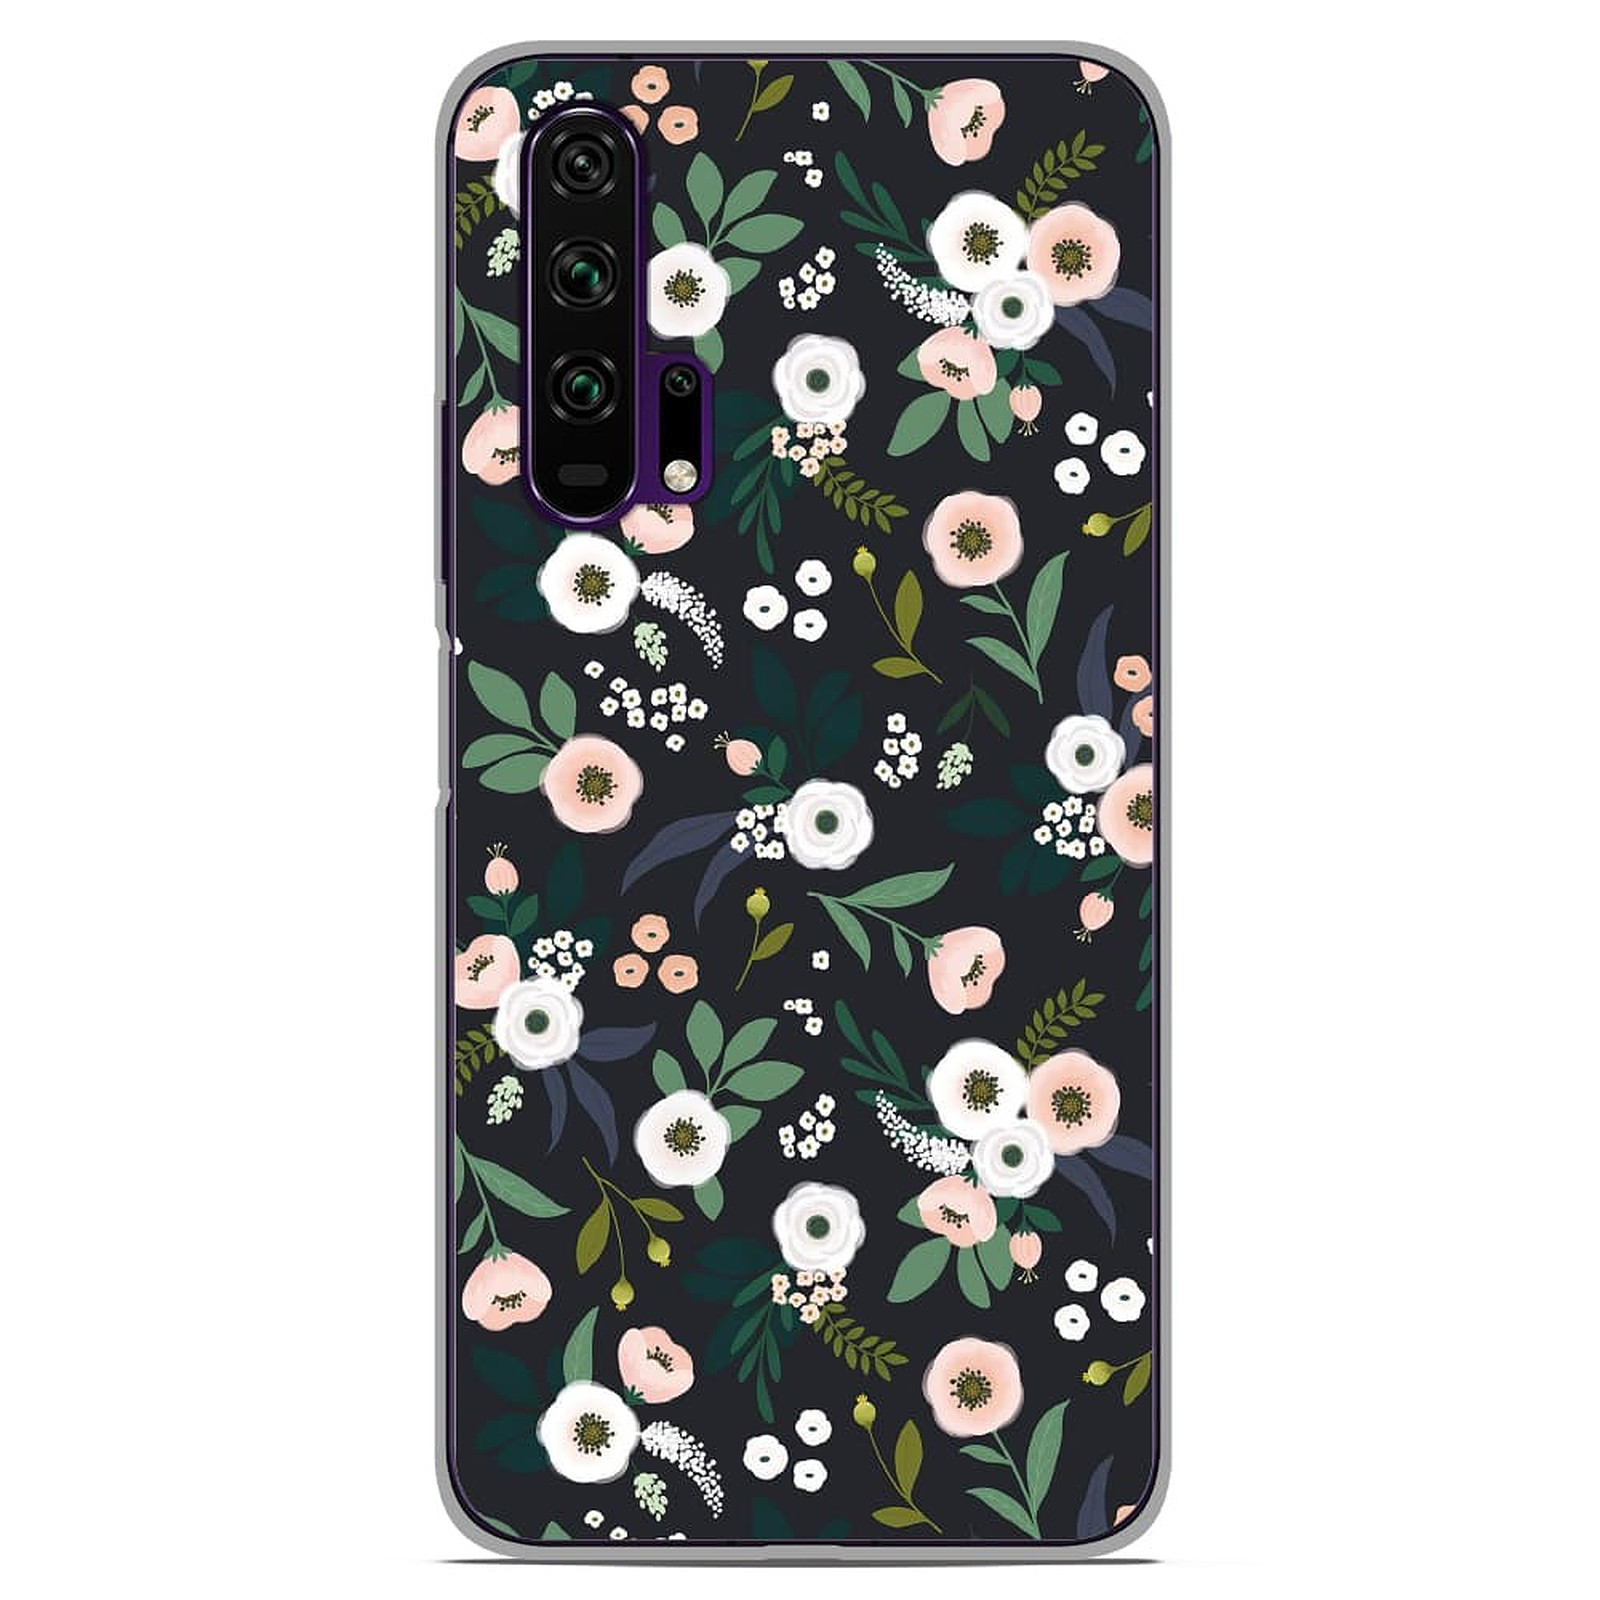 1001 Coques Coque silicone gel Huawei Honor 20 Pro motif Flowers Noir - Coque telephone 1001Coques